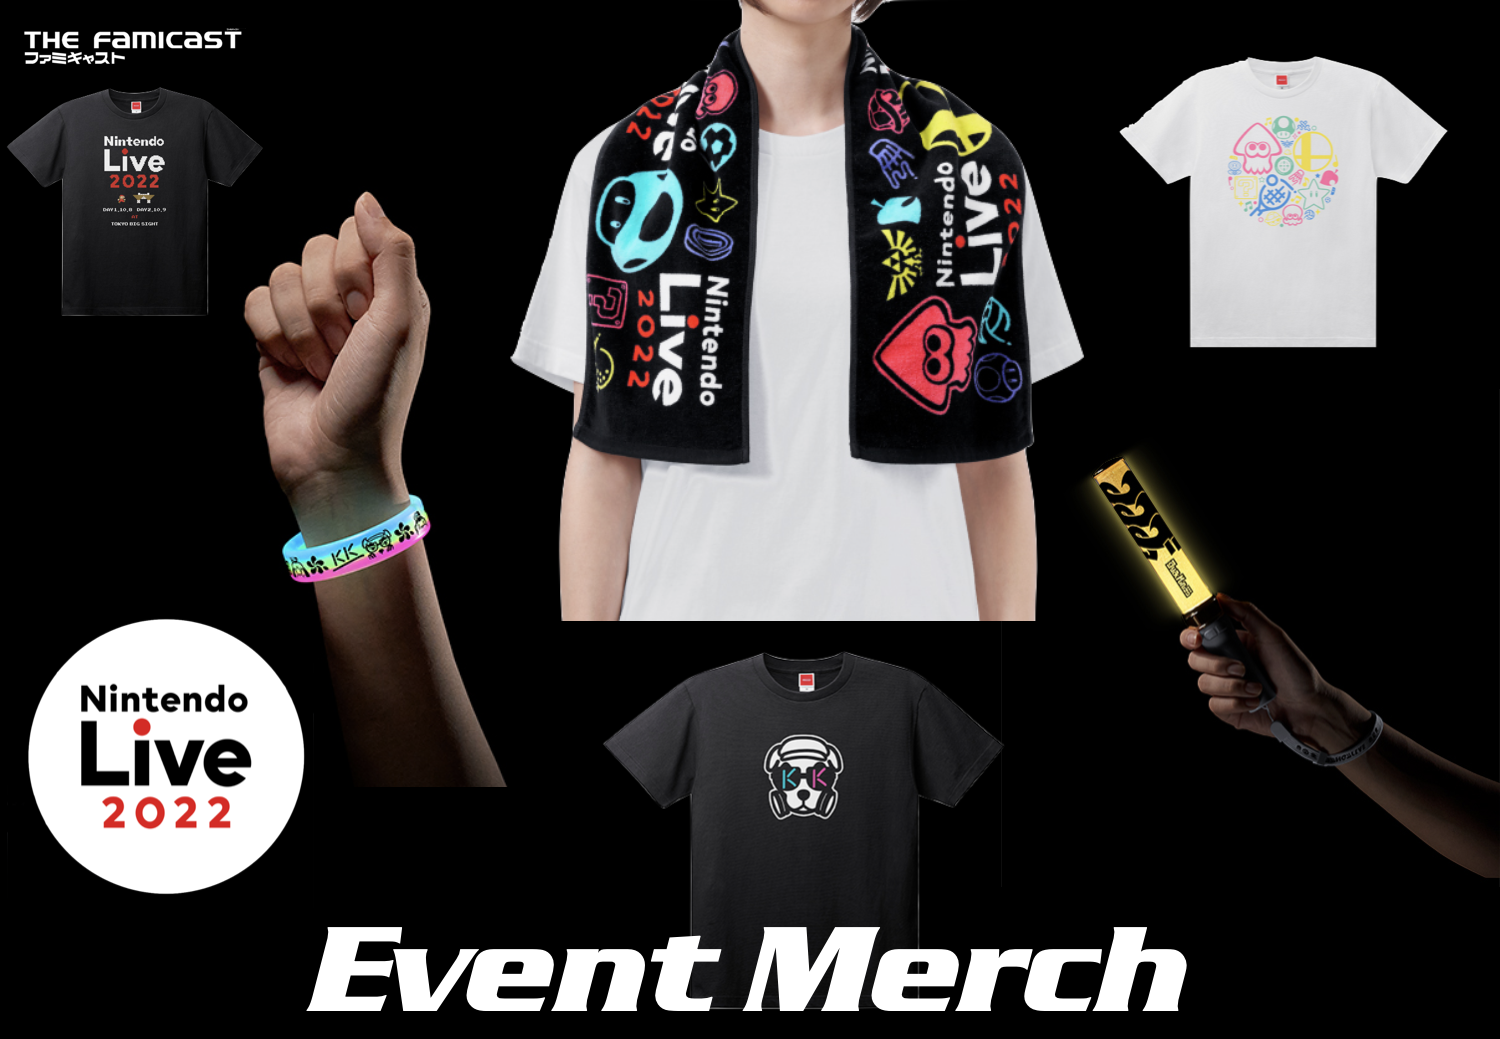 Nintendo Live 2022 Merch NOT to be Sold at Event in October